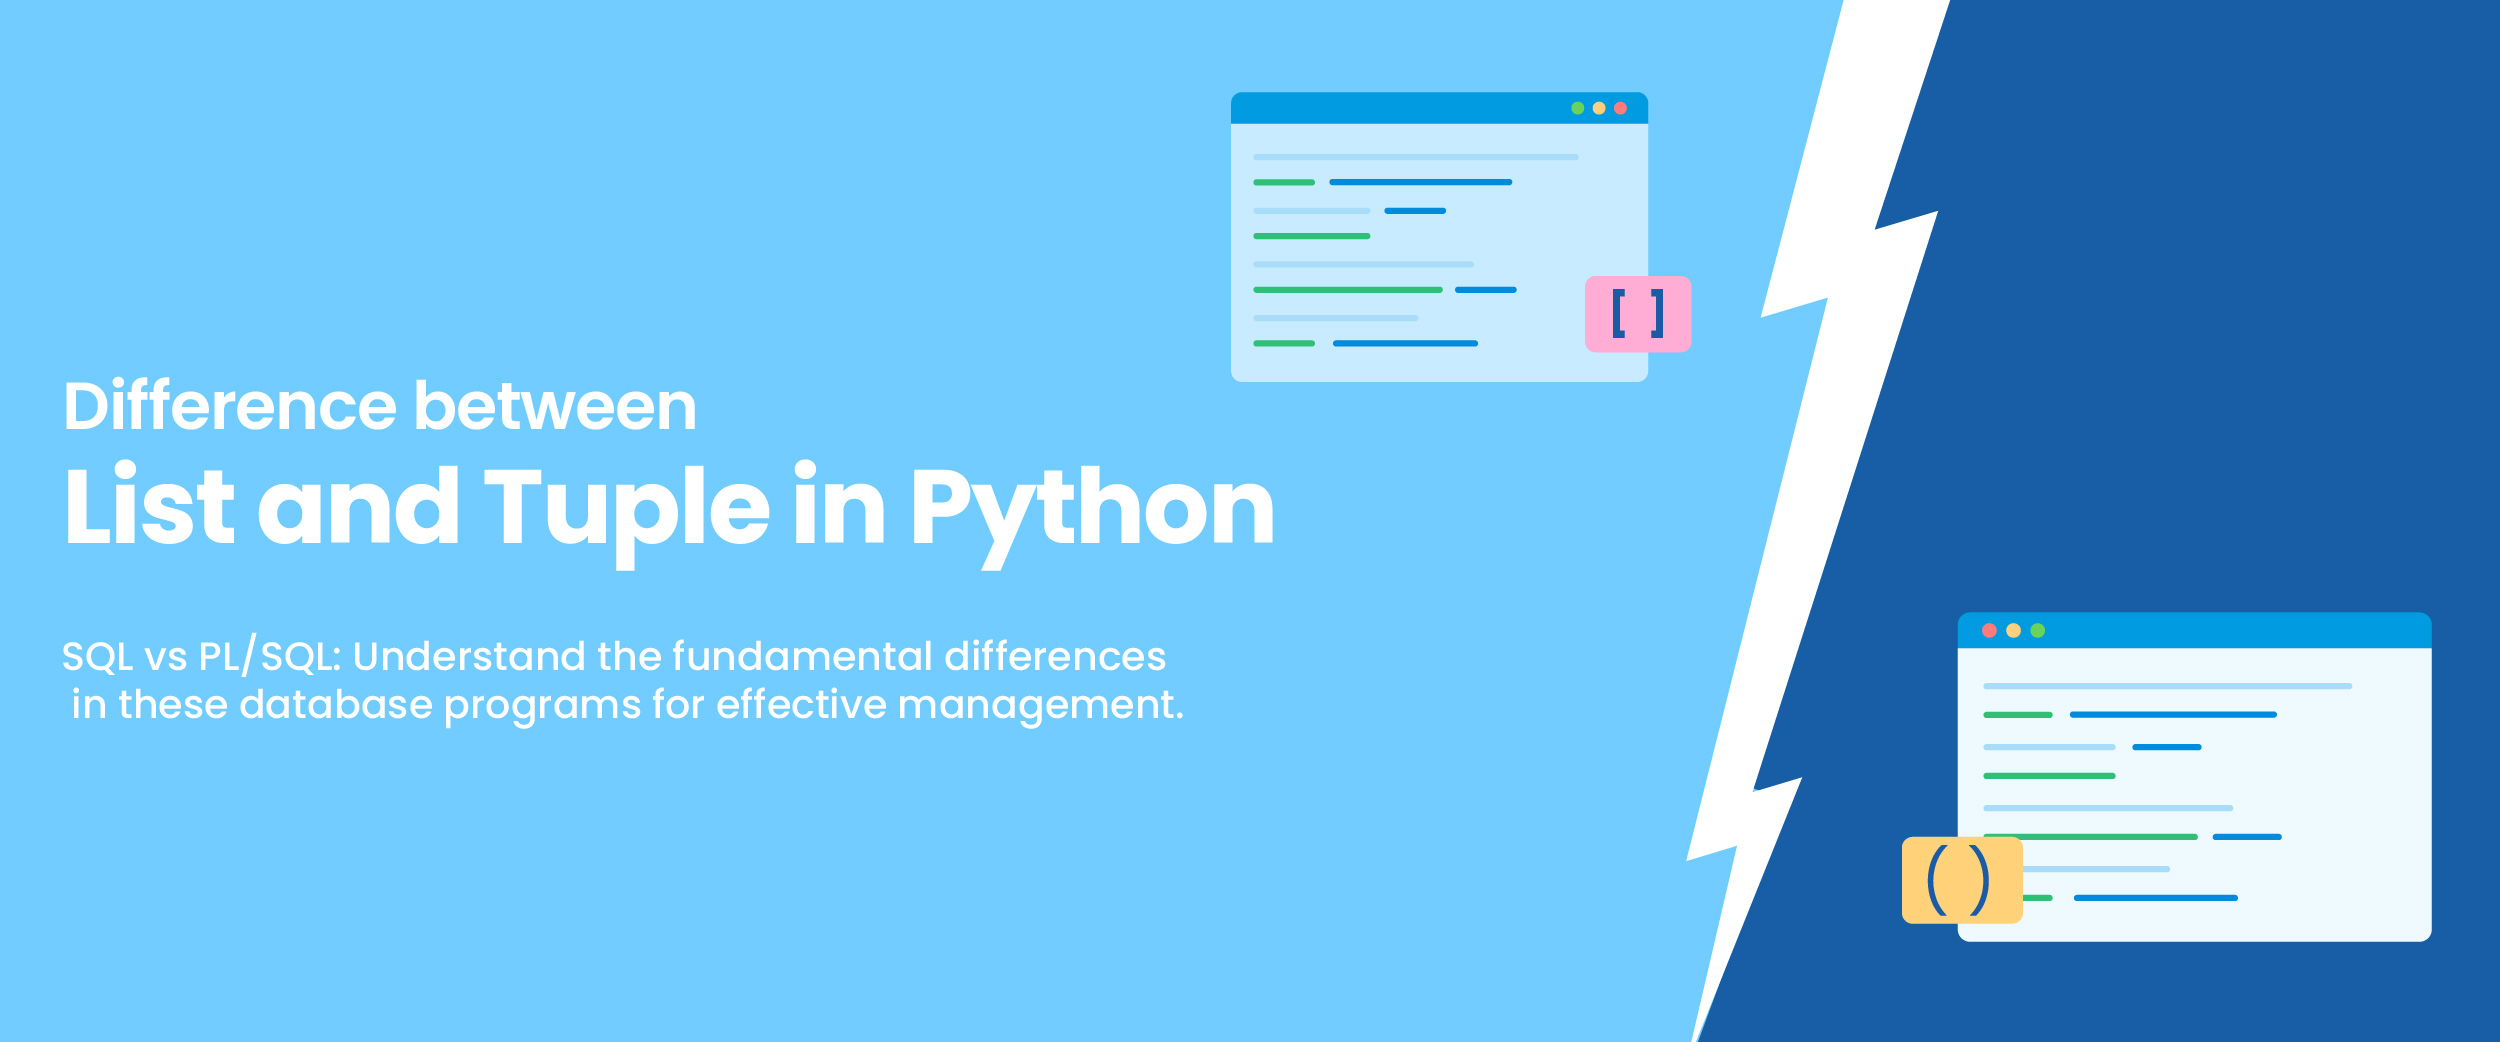 List Vs Tuple: Difference Between List And Tuple In Python